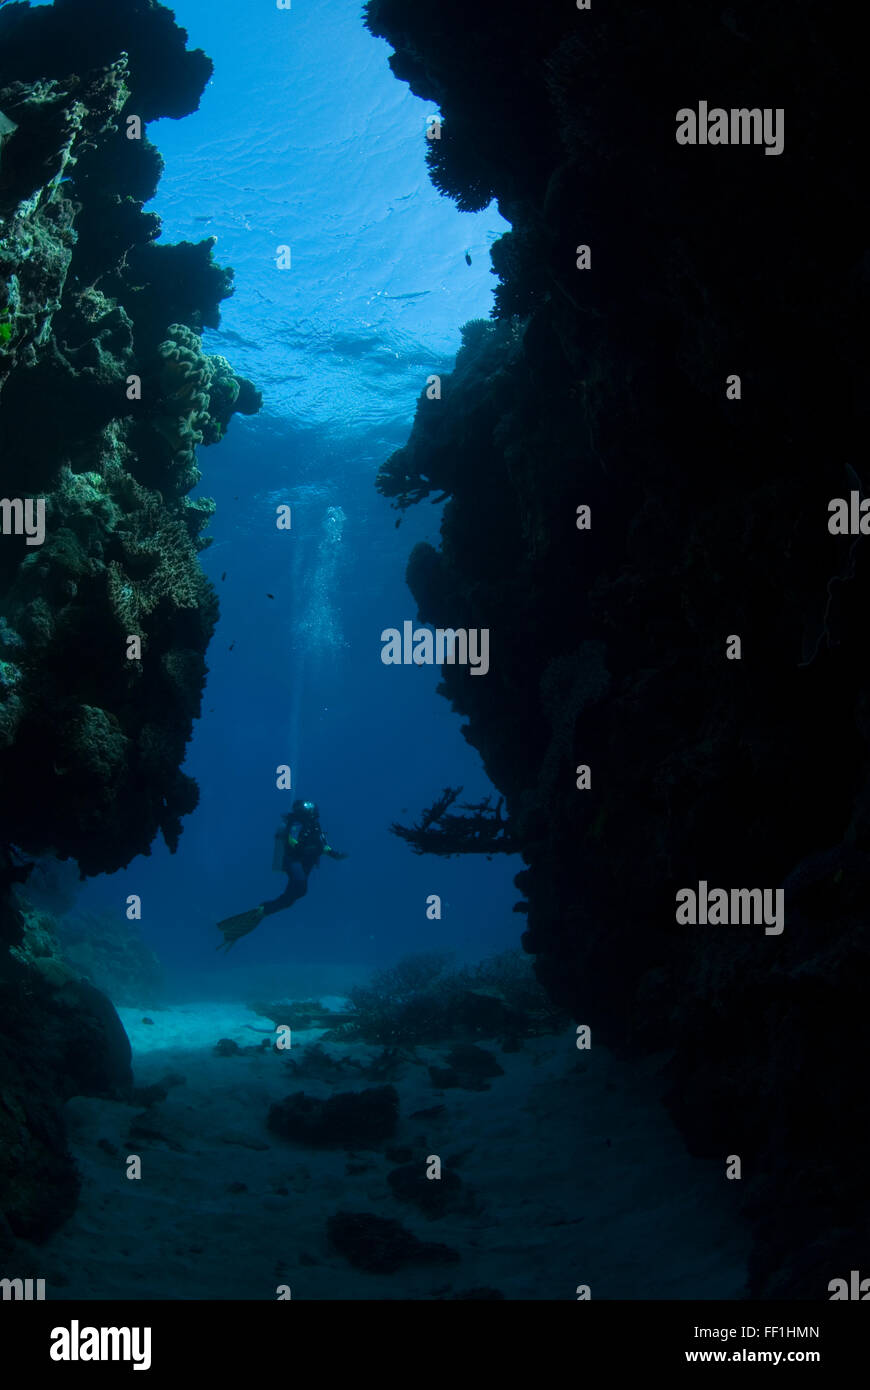 Silhouette of underwater cave with divers Stock Photo - Alamy